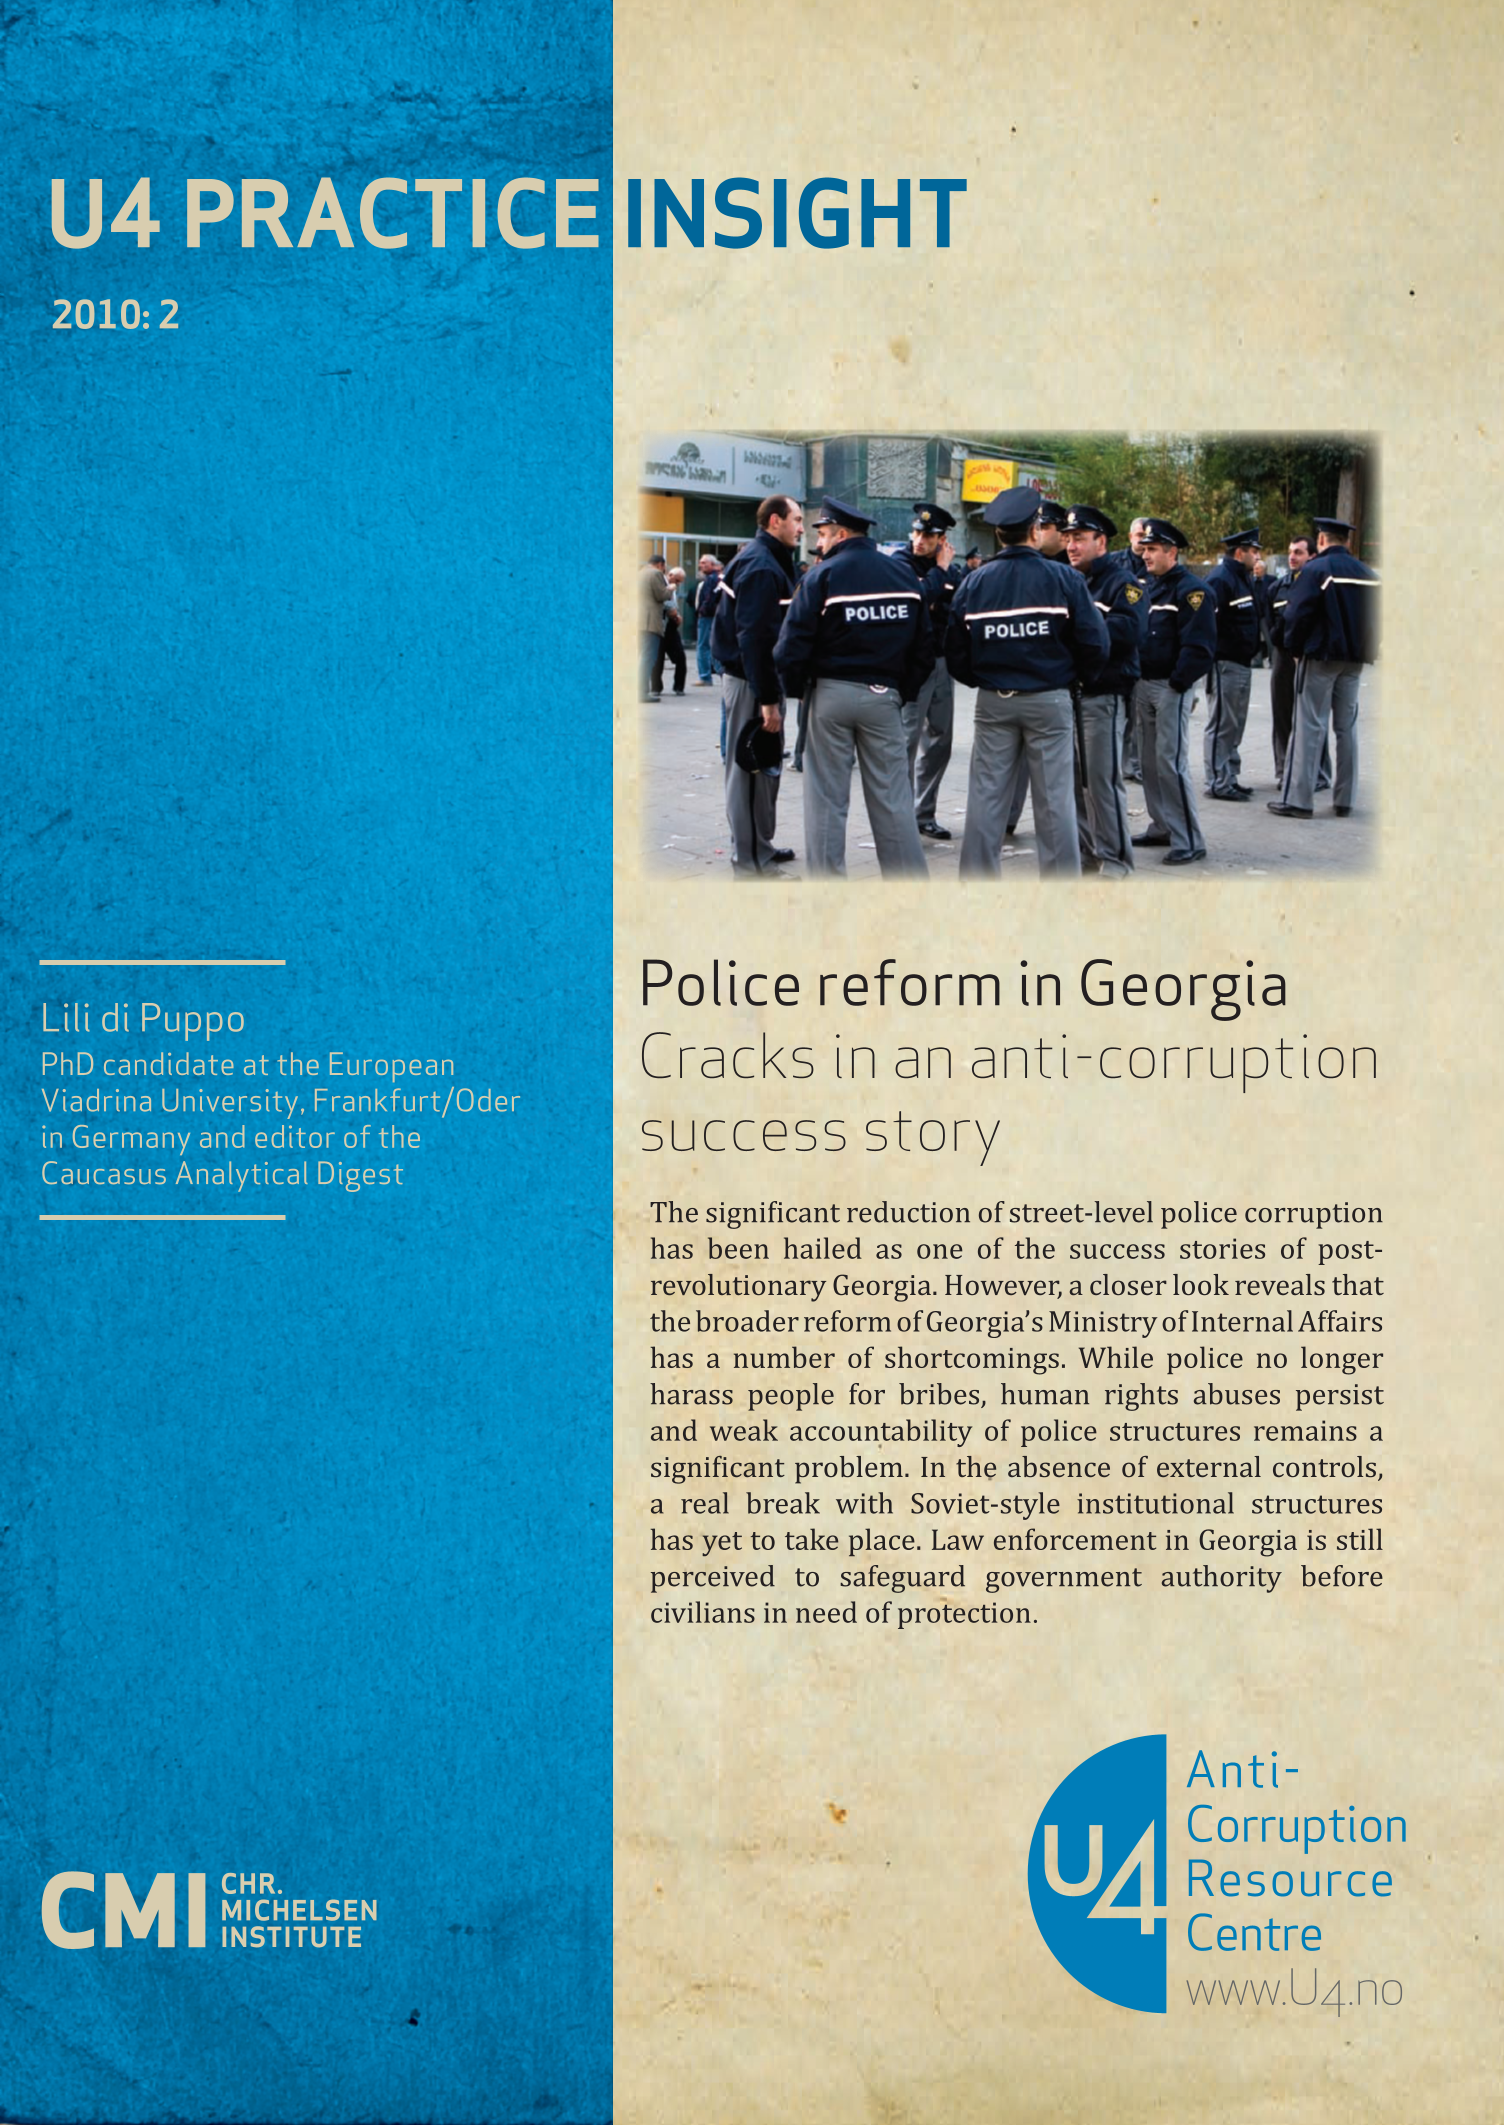 Police reform in Georgia. Cracks in an anti-corruption success story